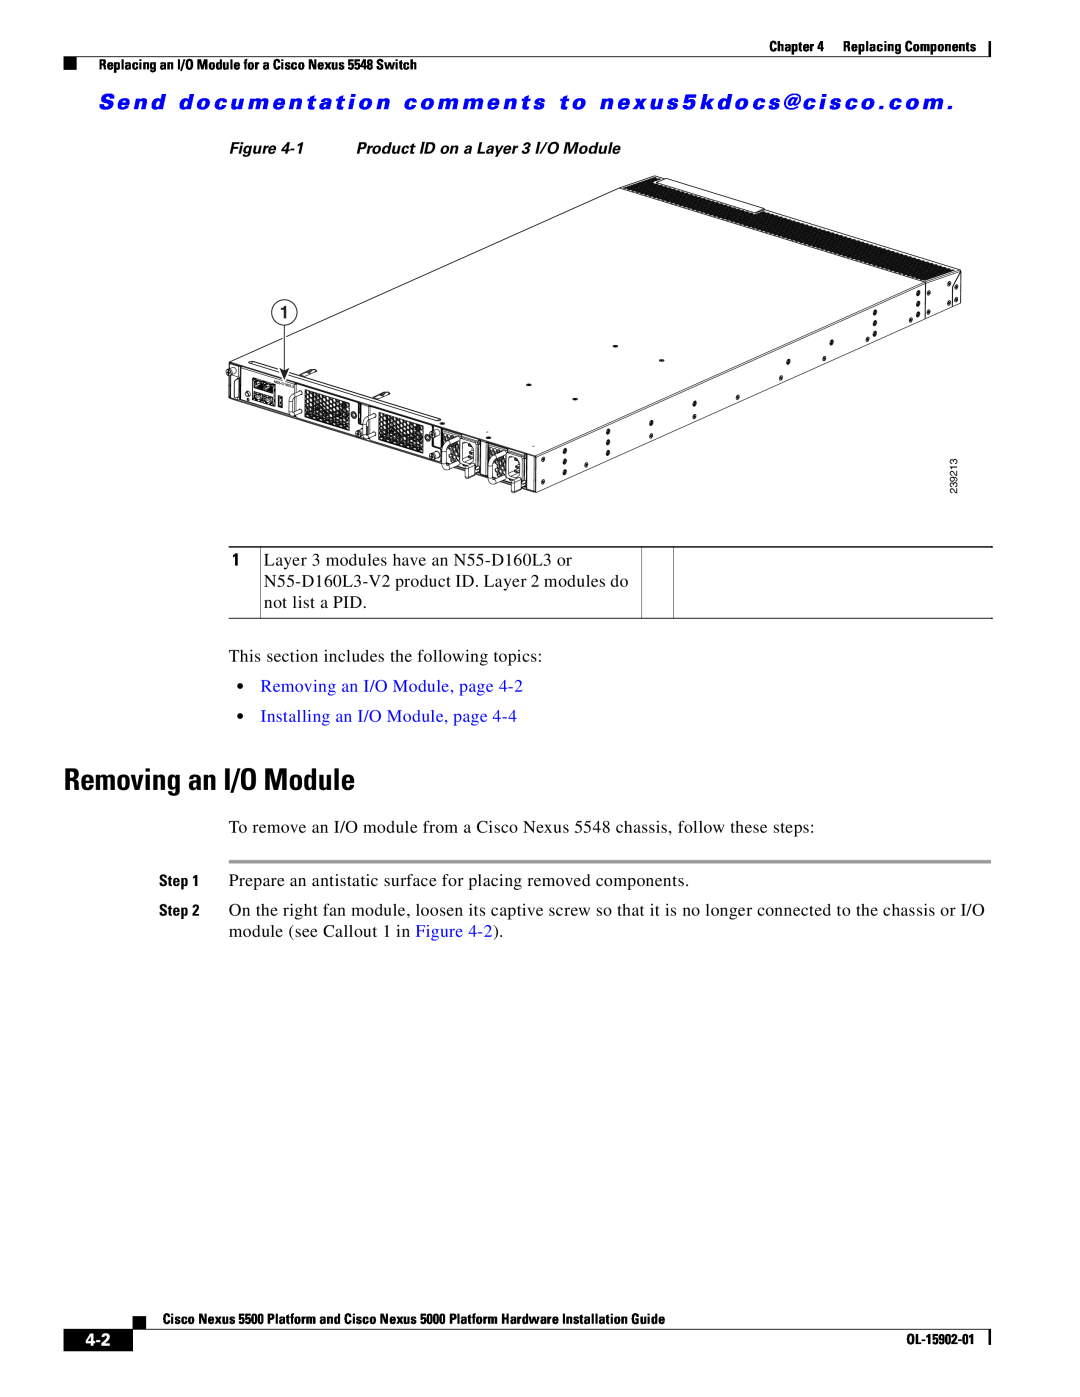 Cisco Systems 5000 manual Removing an I/O Module, page Installing an I/O Module, page 